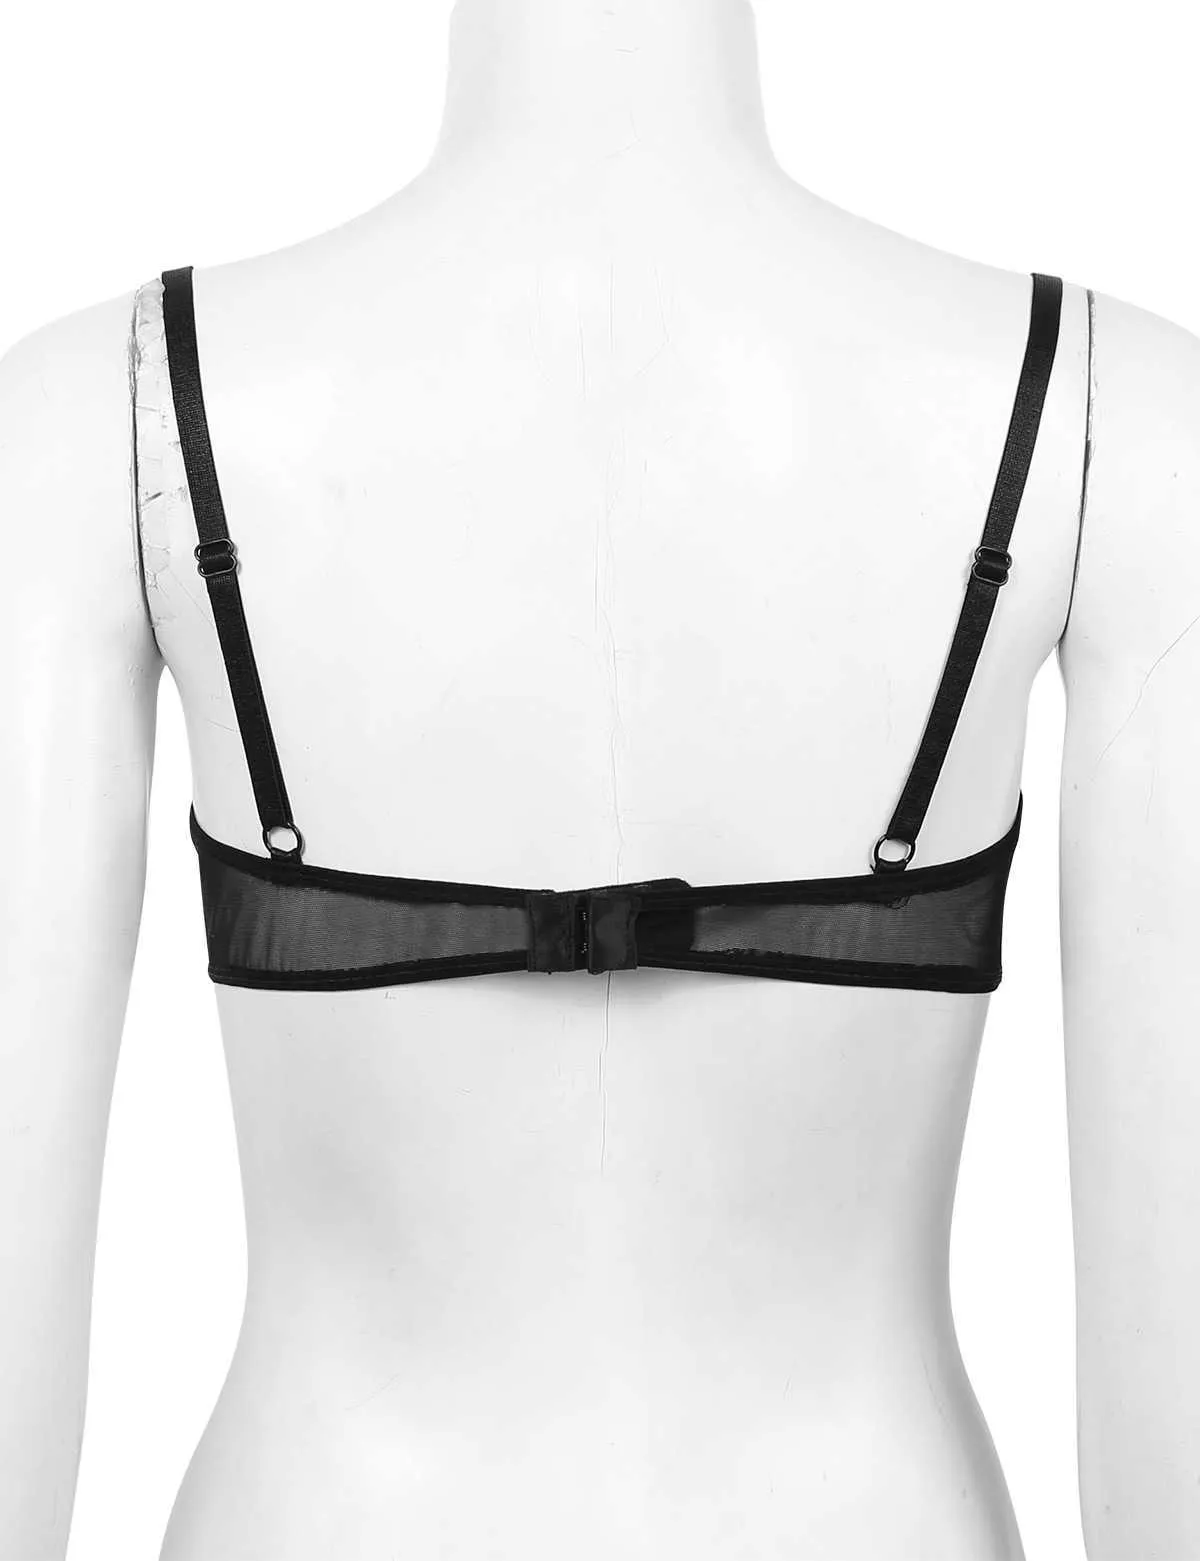 Bras Women Sexy Hollow Out Bra Soft Sheer Lace Adjustable Straps